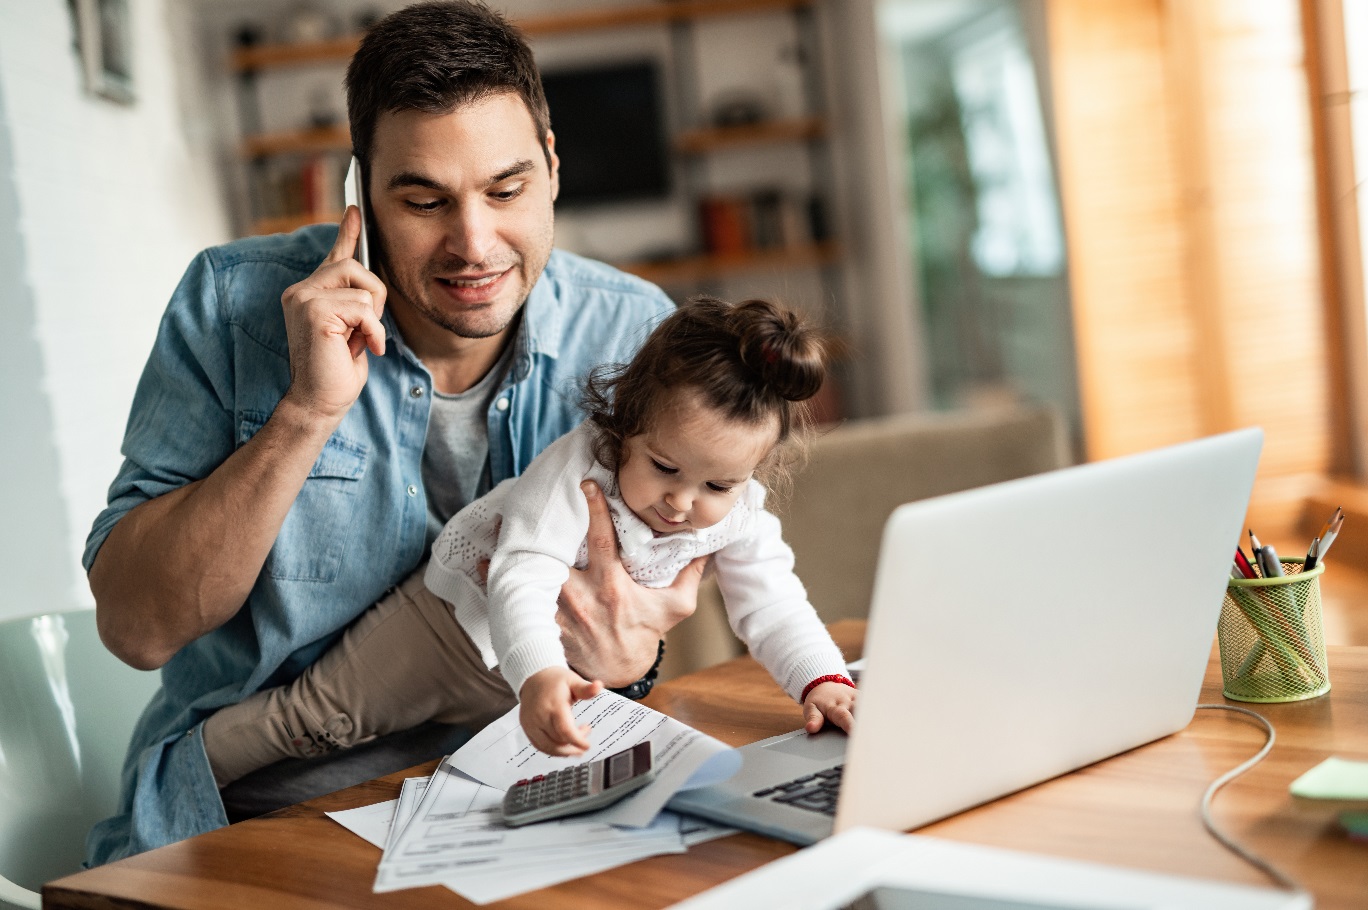 Working From Home With Kids: What Options Do Employers Have With Working Parents?